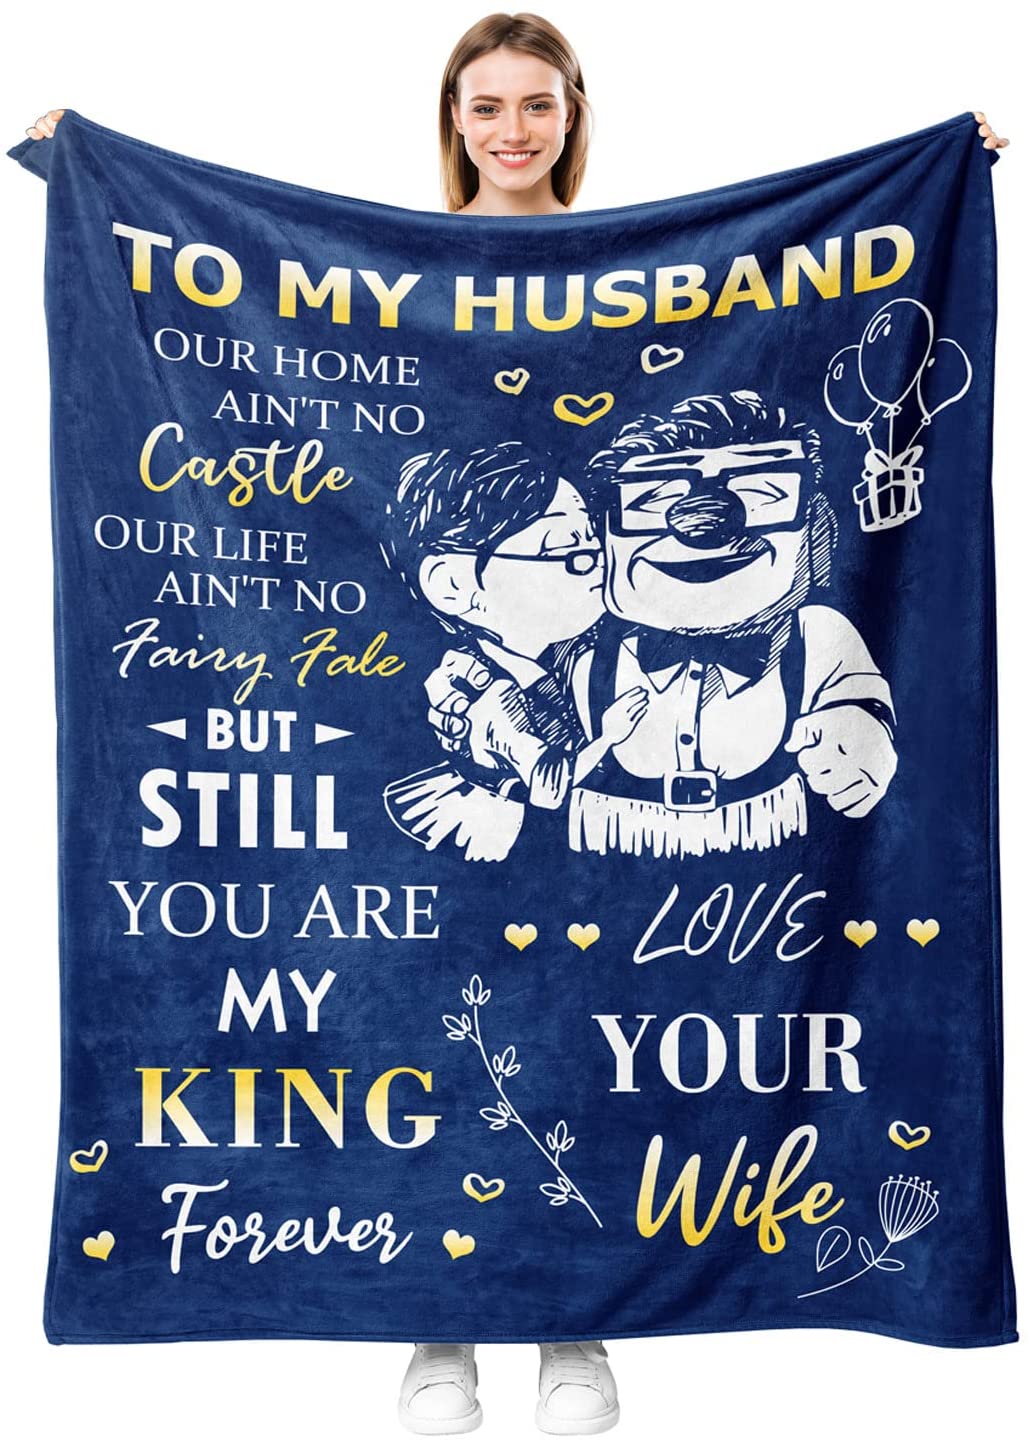 Gifts For Husband Blanket - You Are My King Forever, To My Husband Blanket - Gift From Wife, Anniversary, Wedding, Valentines, Mother's Day, Christmas, Birthday Blanket